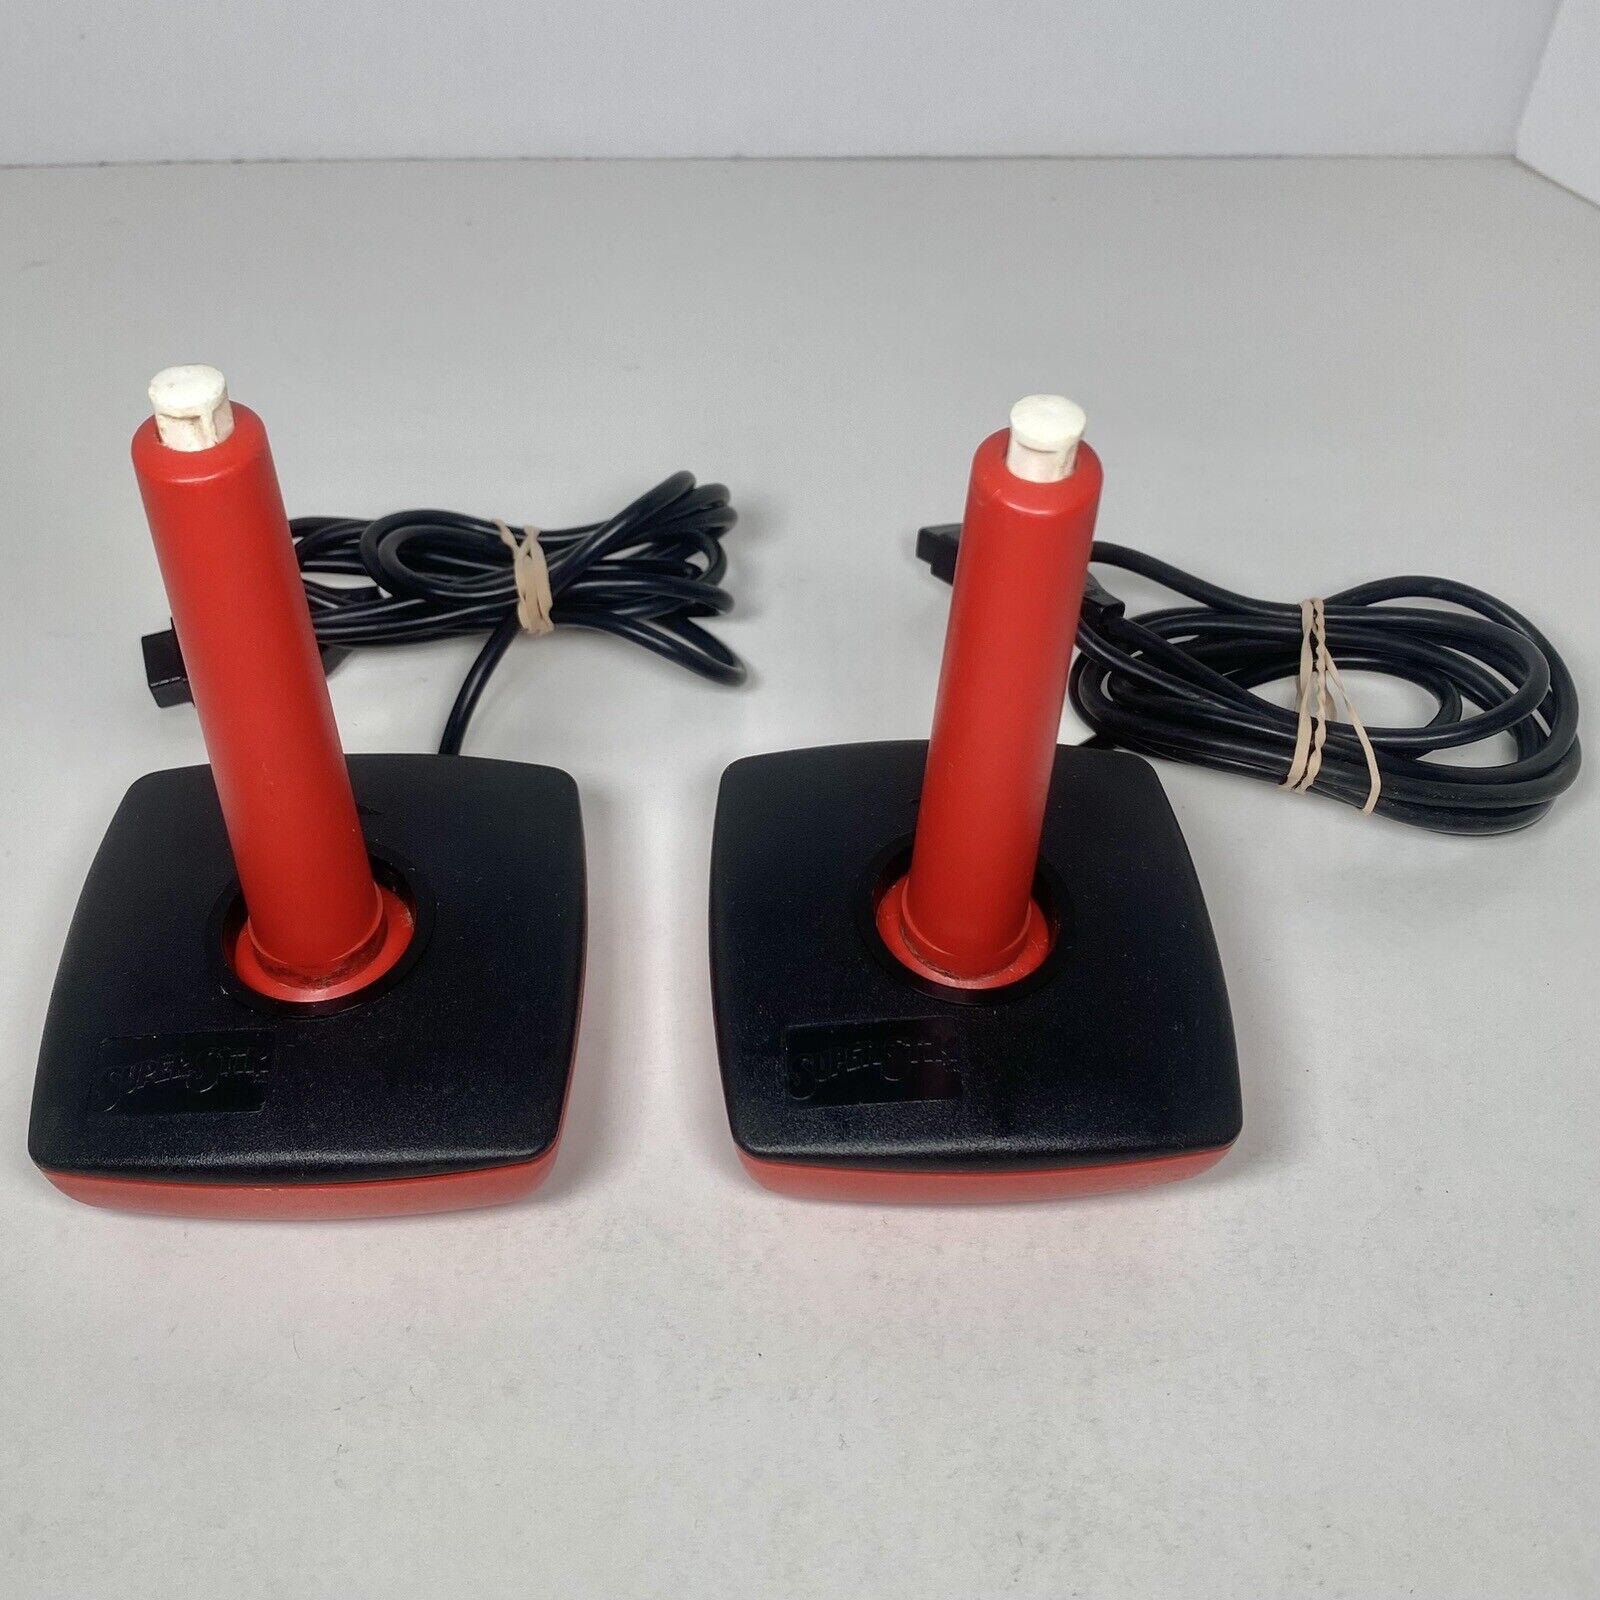 Super Stik Vintage Pair of 2 Red Joystick Controllers For Atari 2600 Commodore